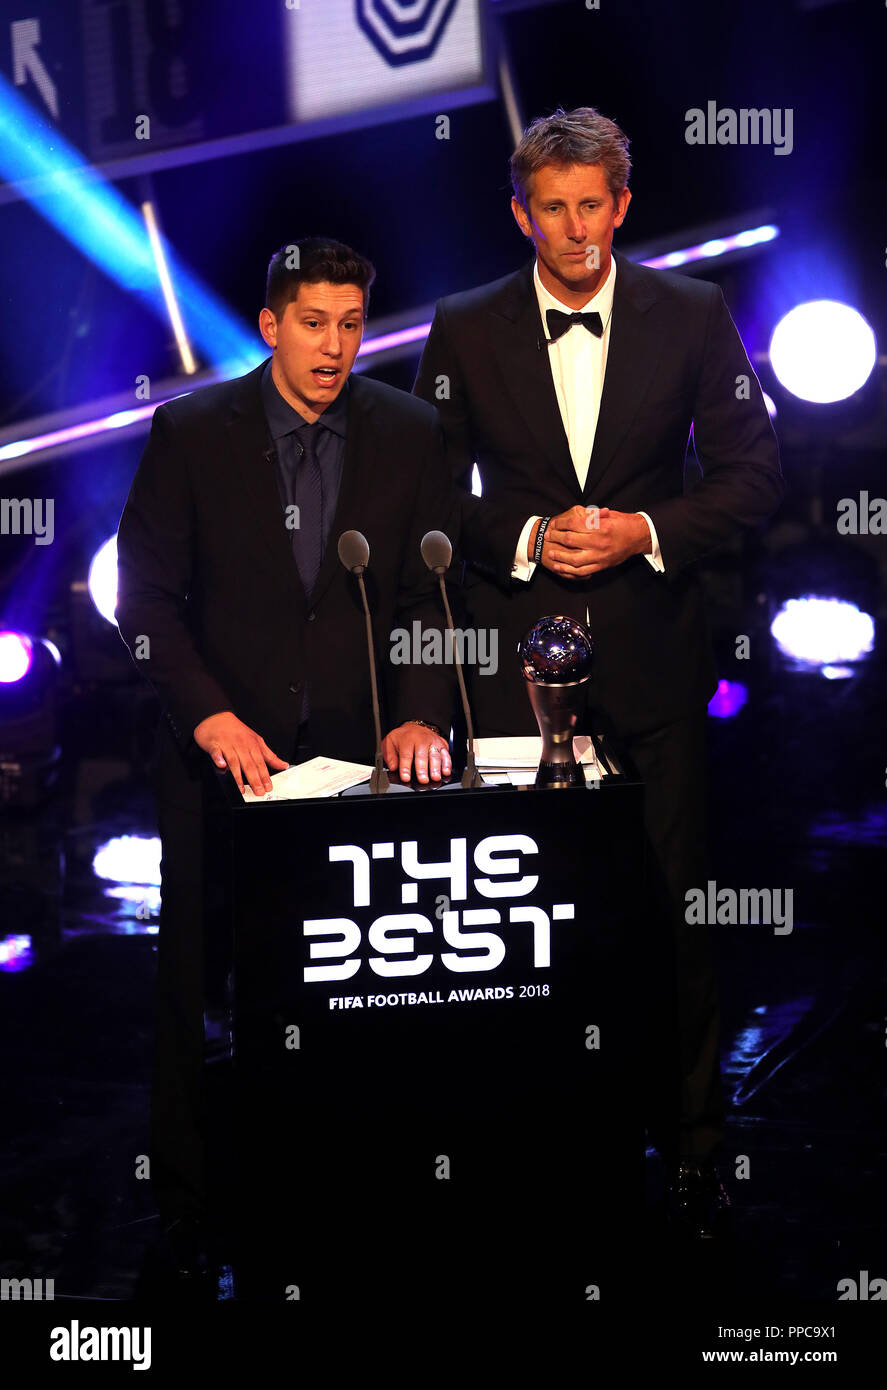 Edwin van der Sar (right) and Chapecoense crash survivor Jackson Follmann present the Best FIFA Goalkeeper Award during the Best FIFA football Awards 2018 at the Royal Festival Hall, London. PRESS ASSOCIATION Photo. Picture date: Monday September 24, 2018. See PA story soccer Awards. Photo credit should read: Tim Goode/PA Wire Stock Photo